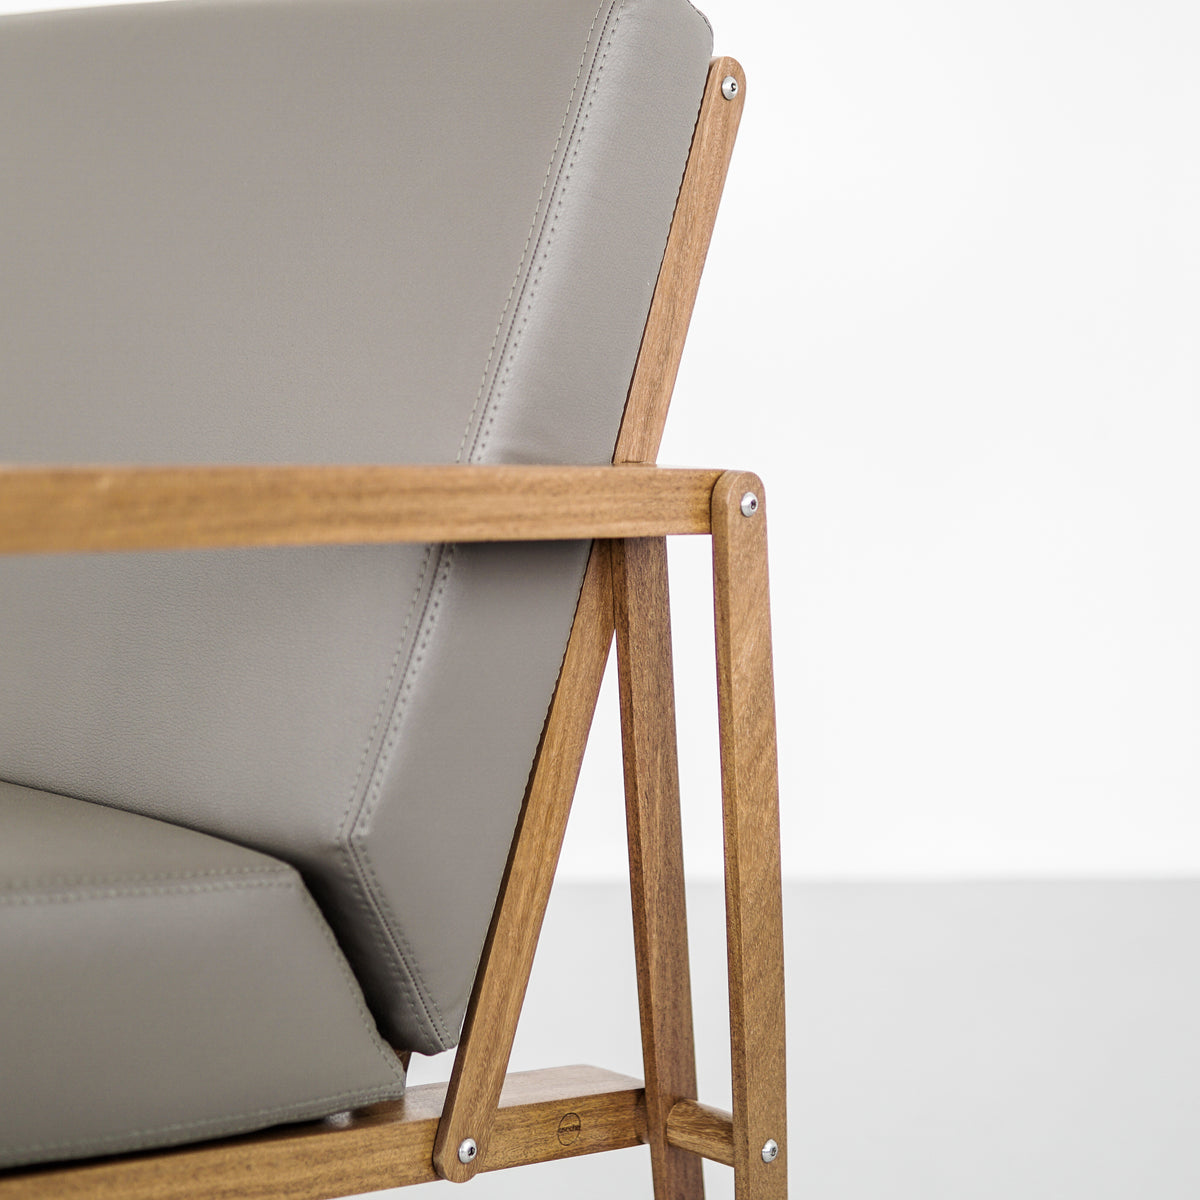 Contemporary Leather Flex Chair | Charcoal grey and Sand colors | LEXUS Chair | Pedro Useche